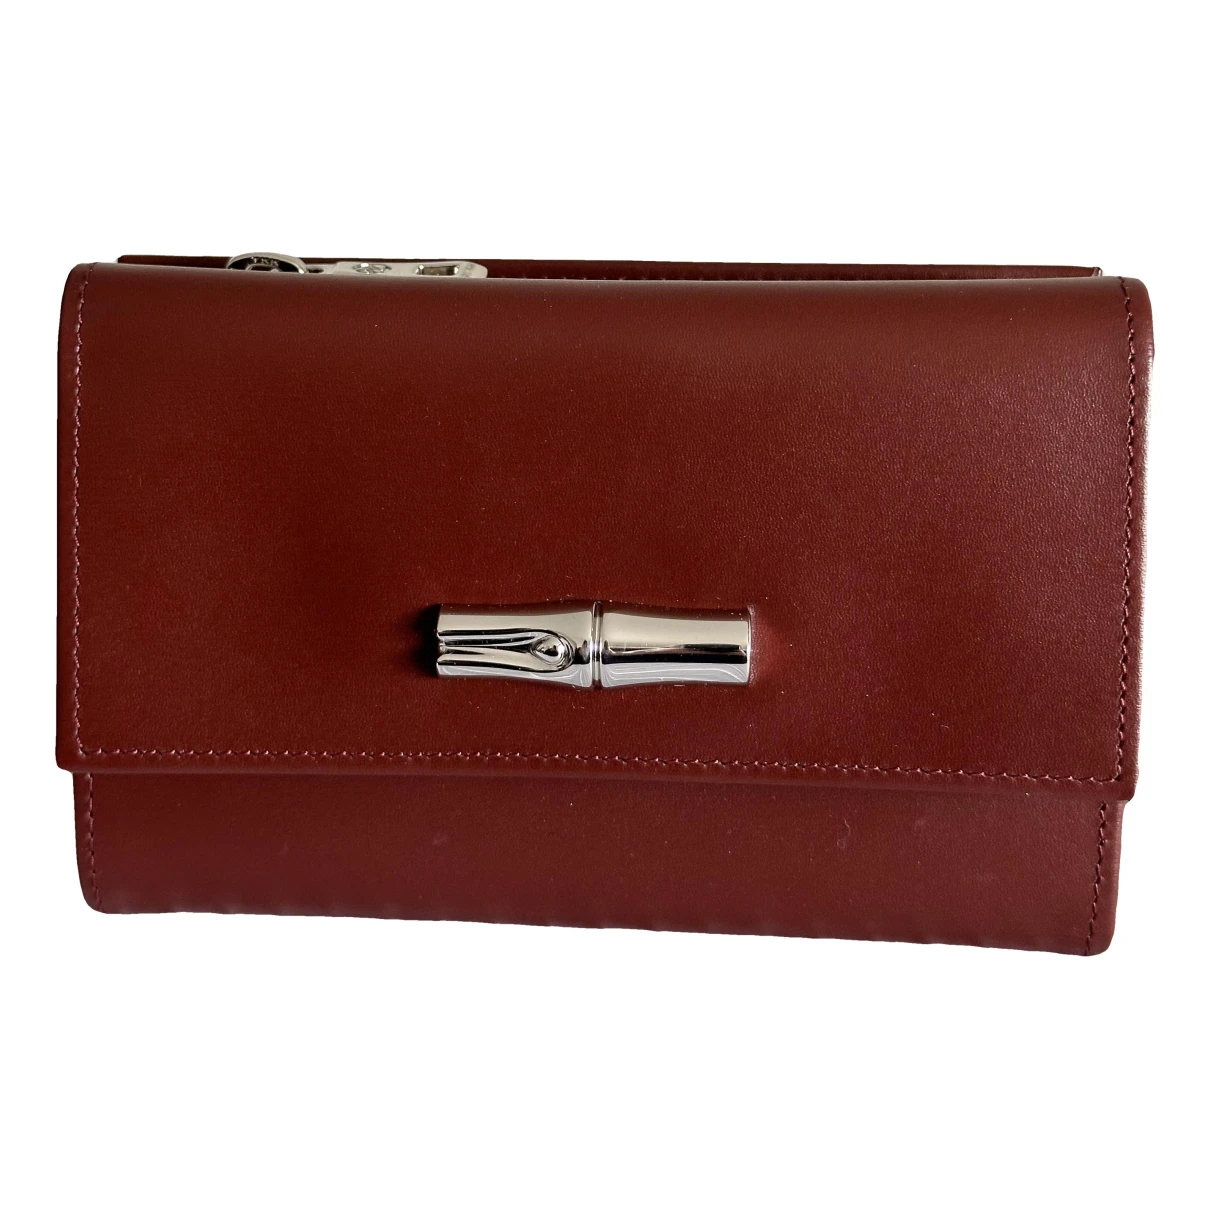 Pre-owned Longchamp Leather Clutch In Burgundy